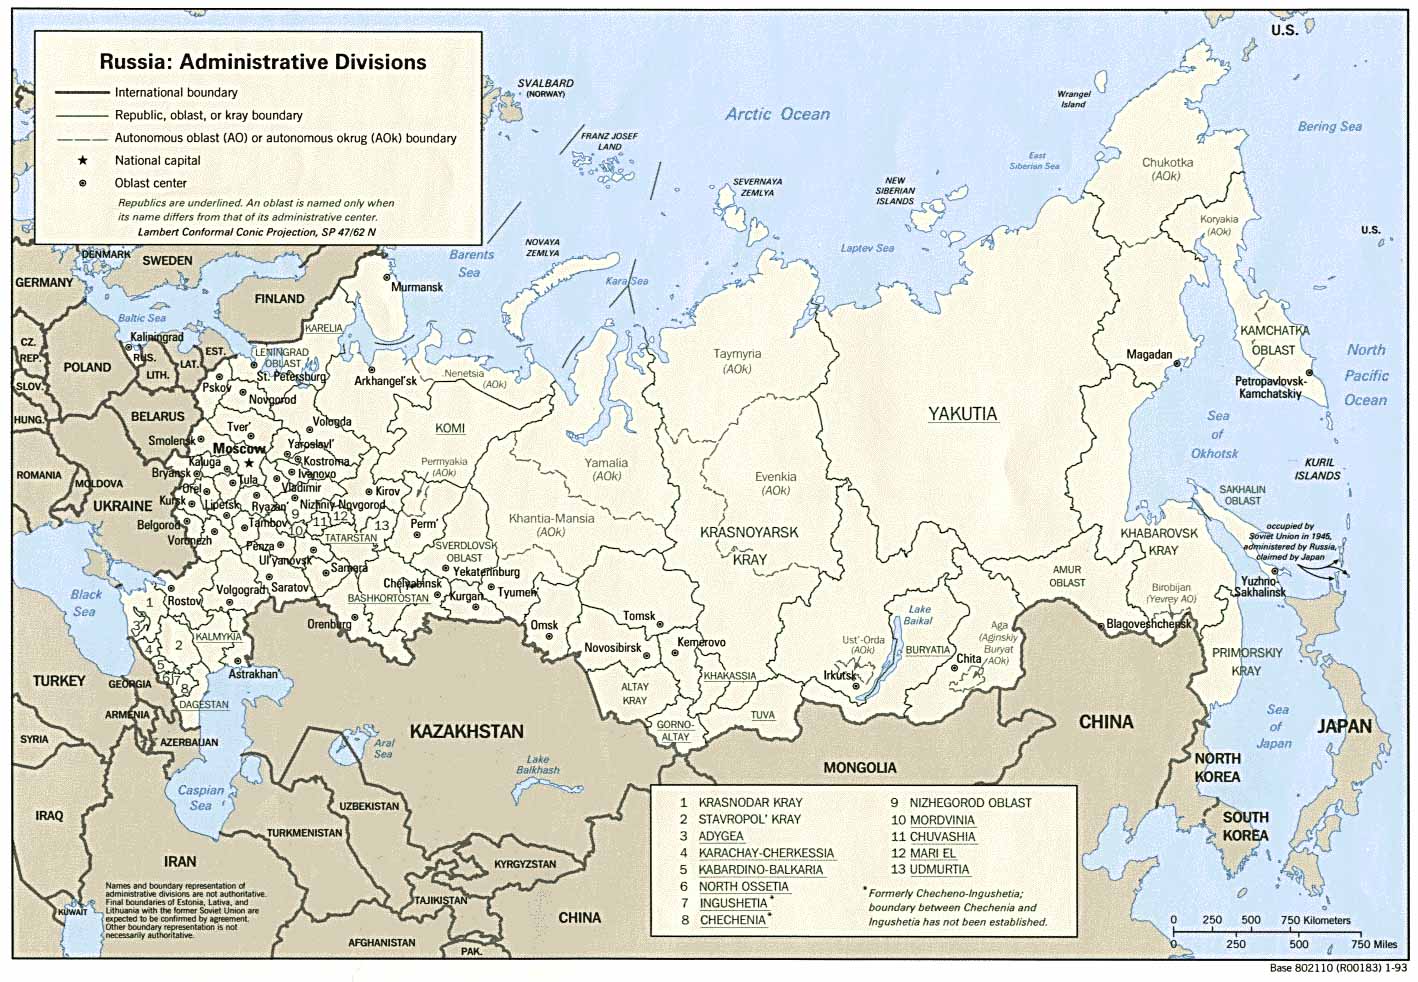 [Country map of Russia]